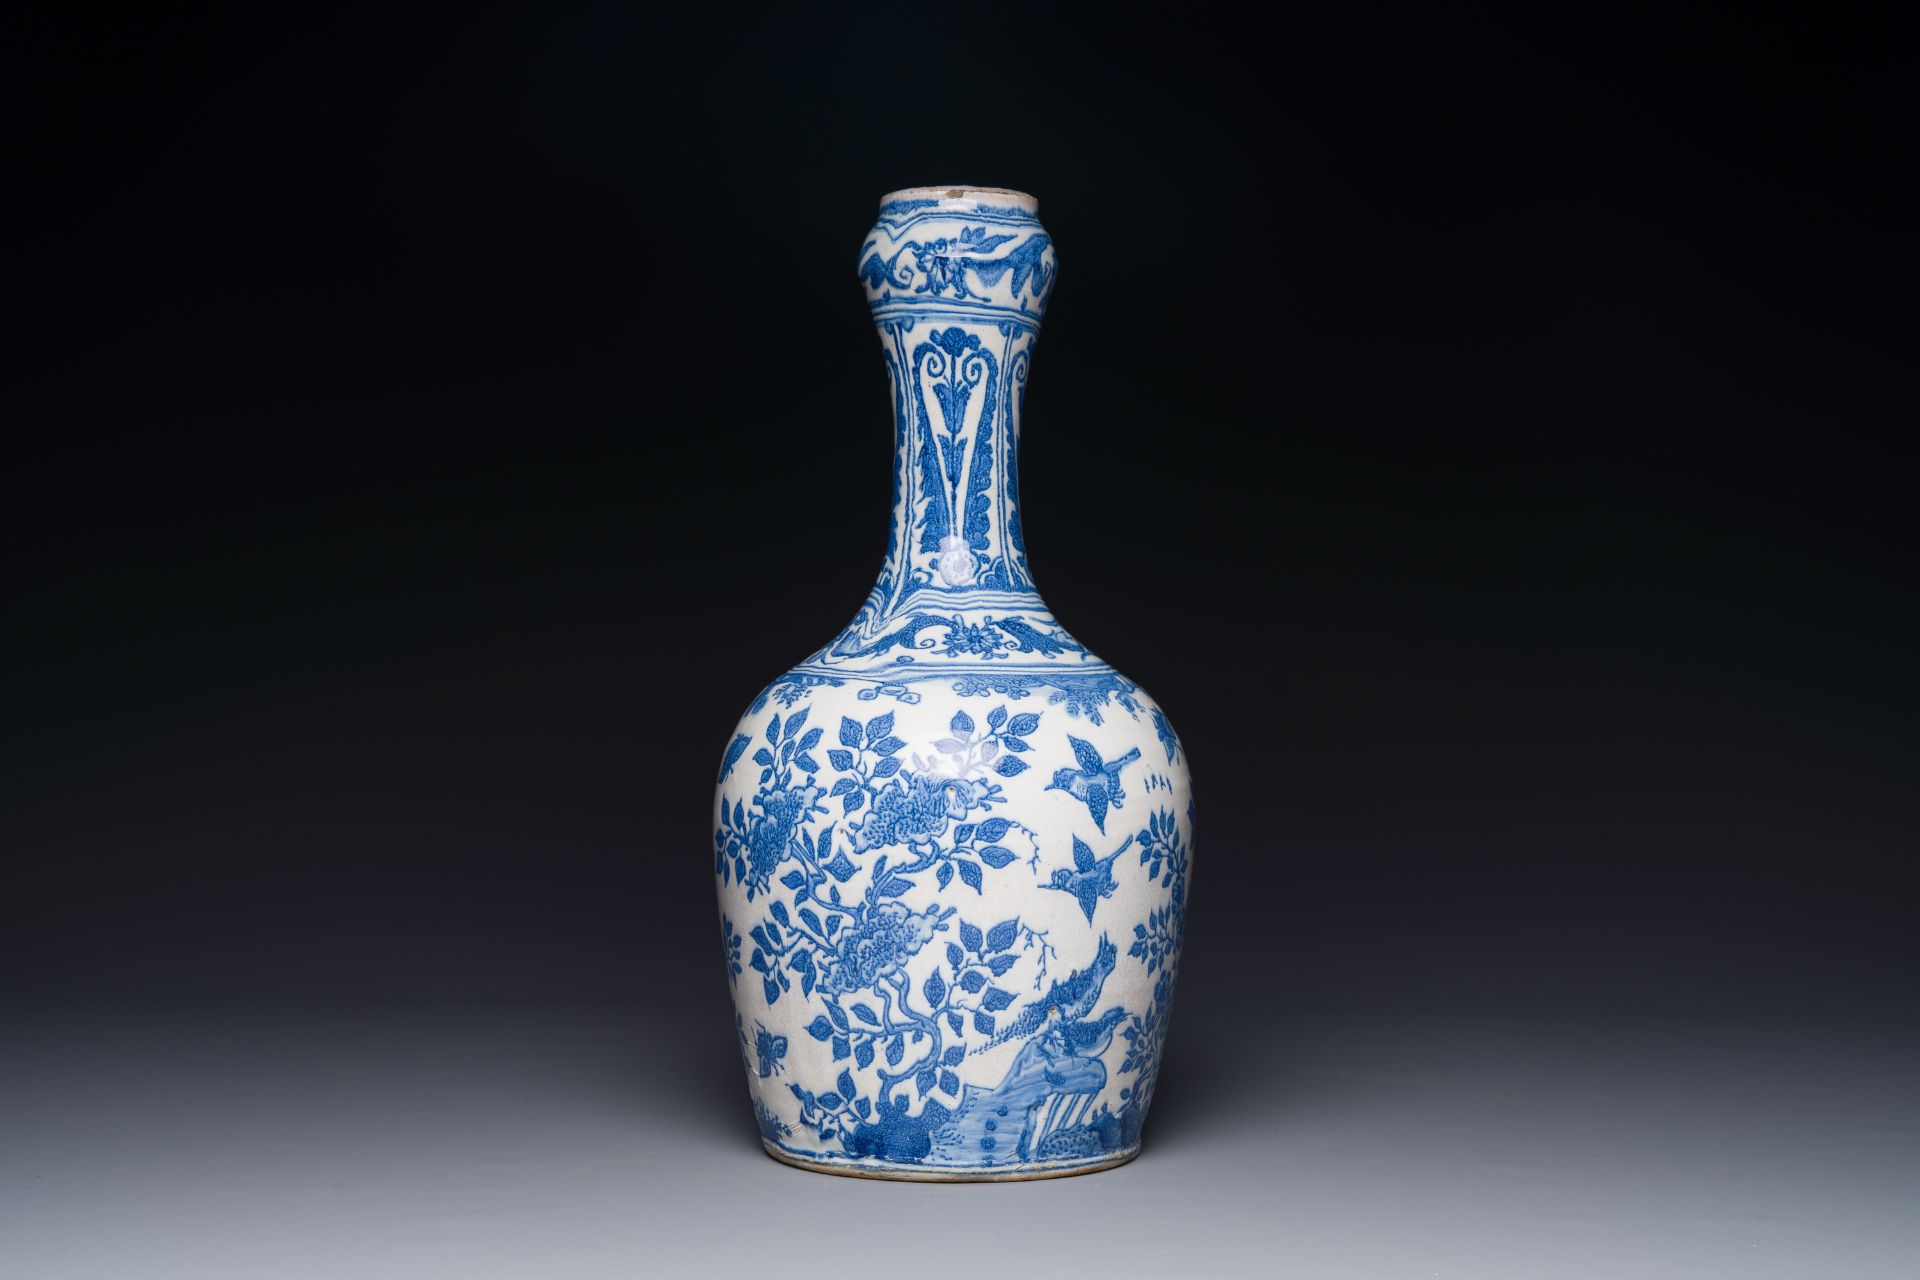 A Dutch blue and white chinoiserie bottle vase, Delft or Haarlem, 1st half 17th C. - Image 4 of 7